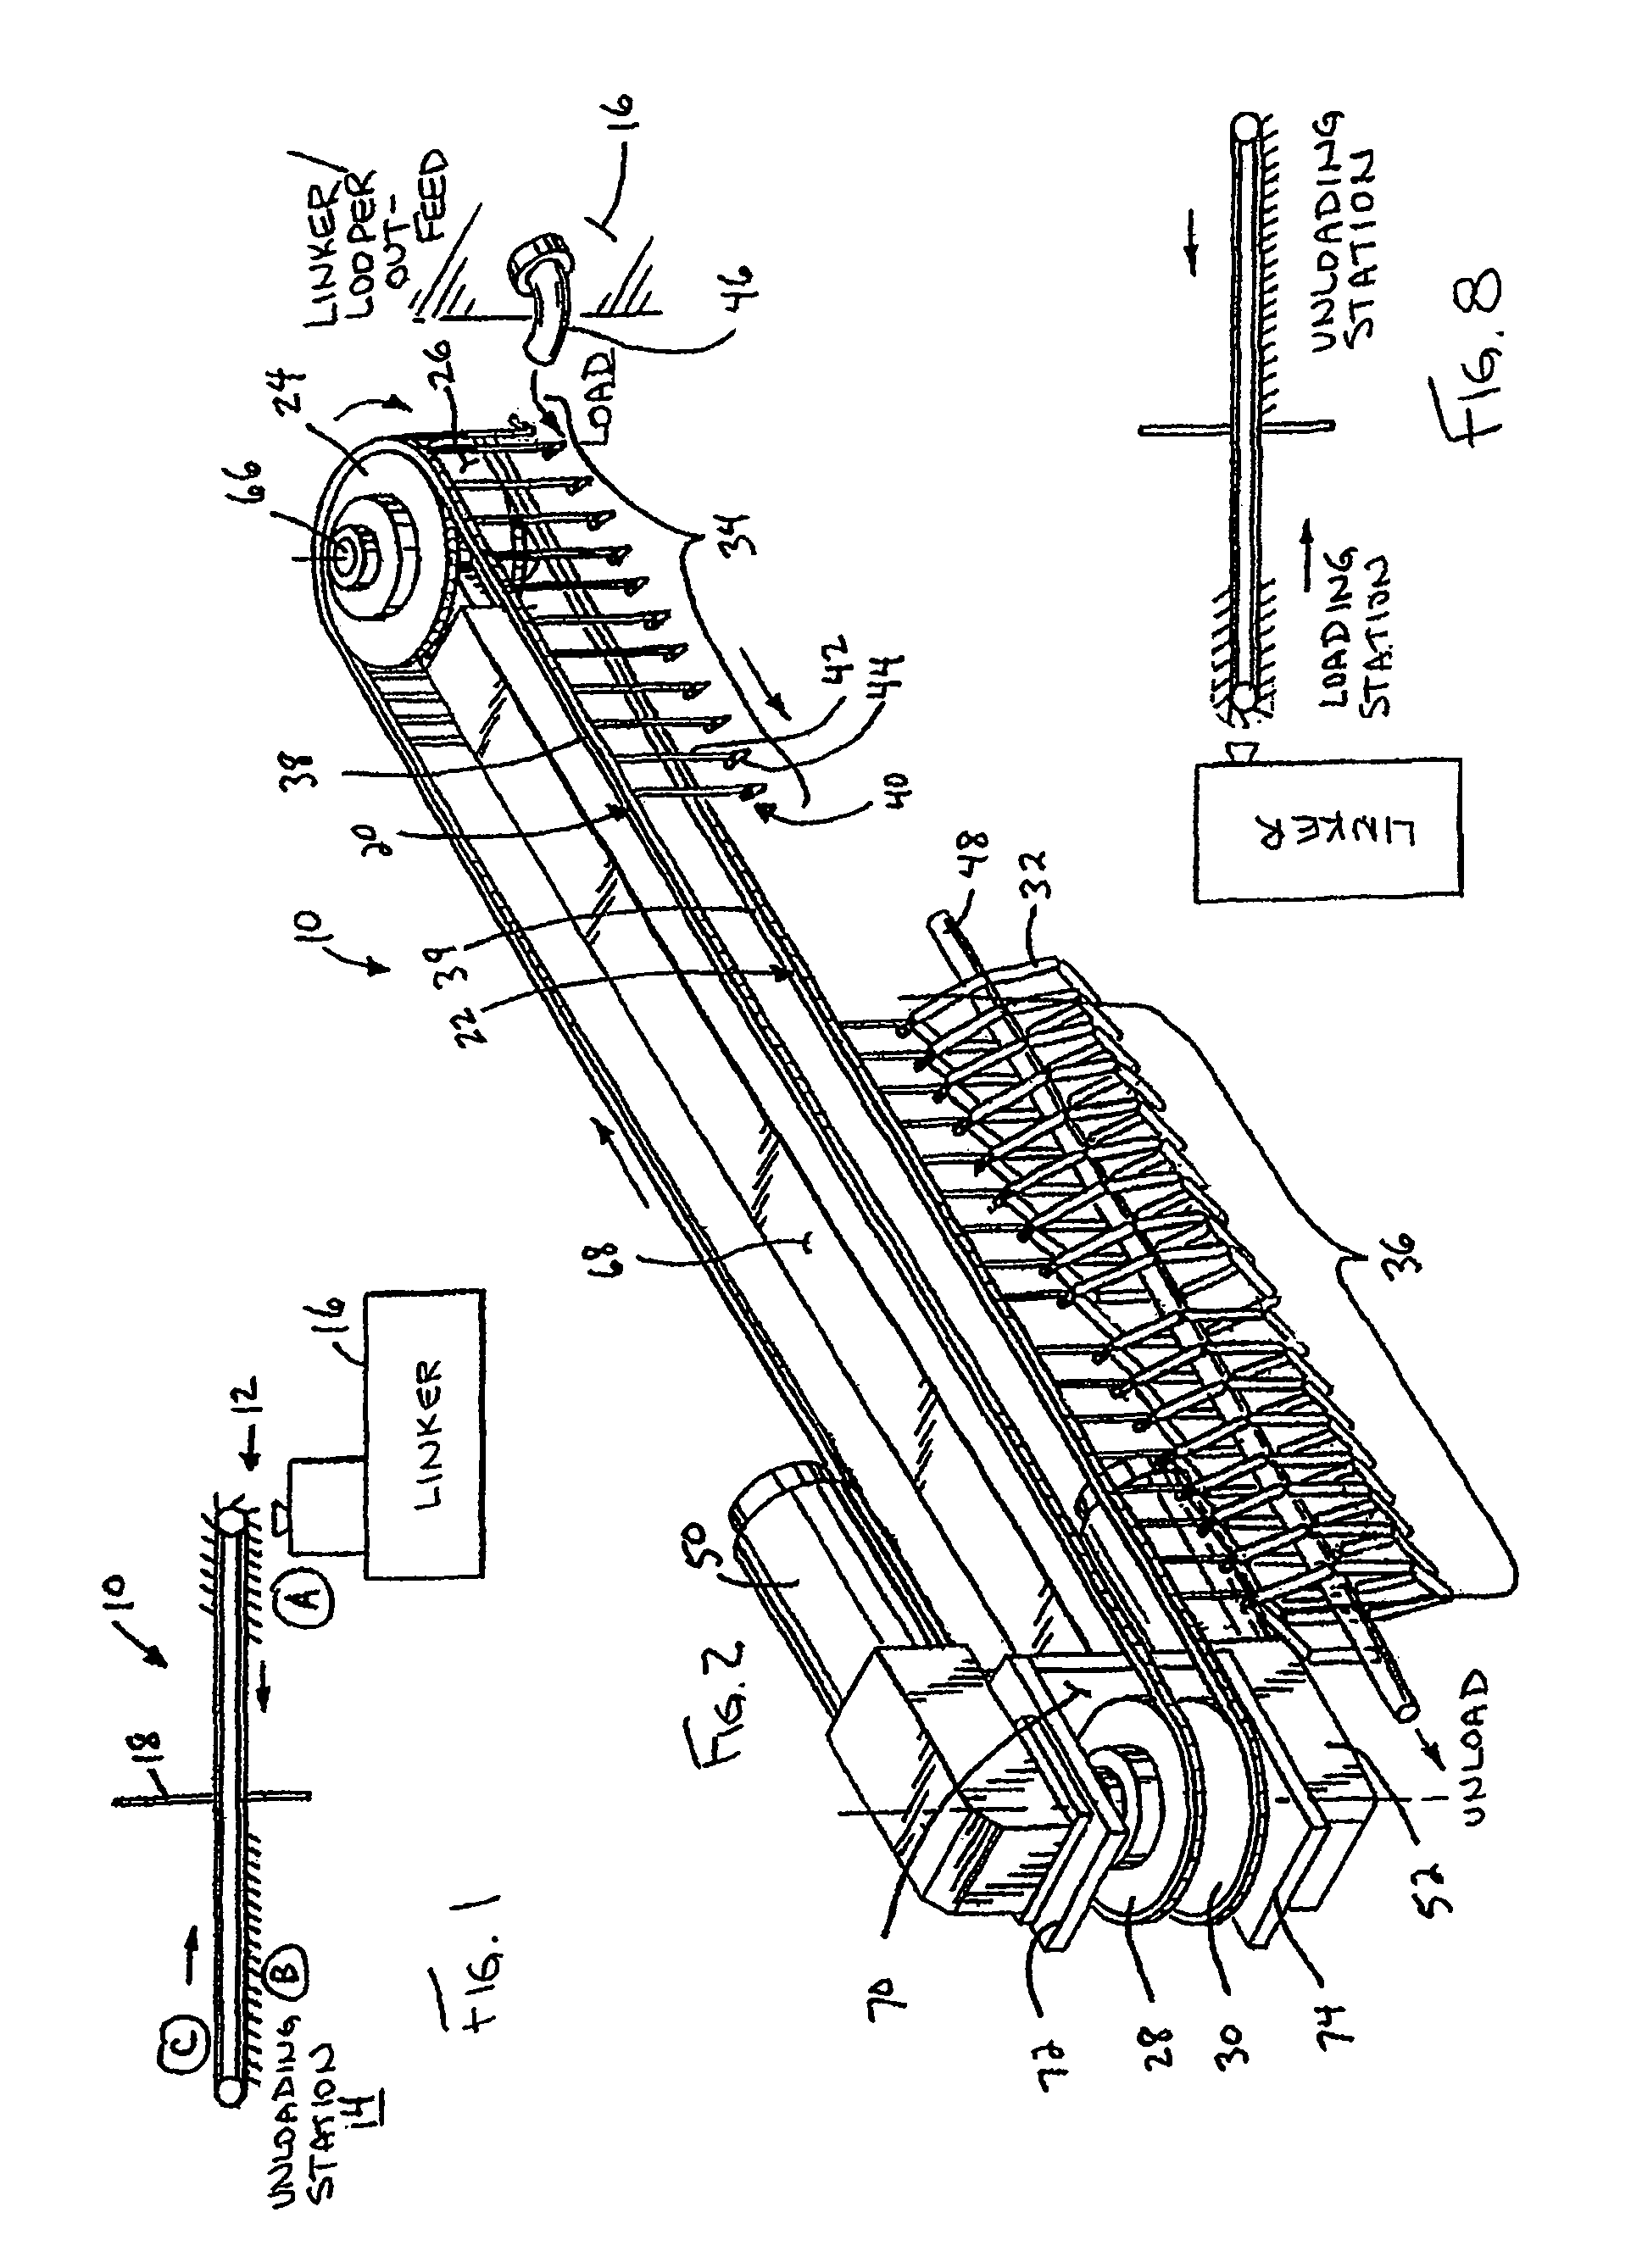 Suspension device for linked products